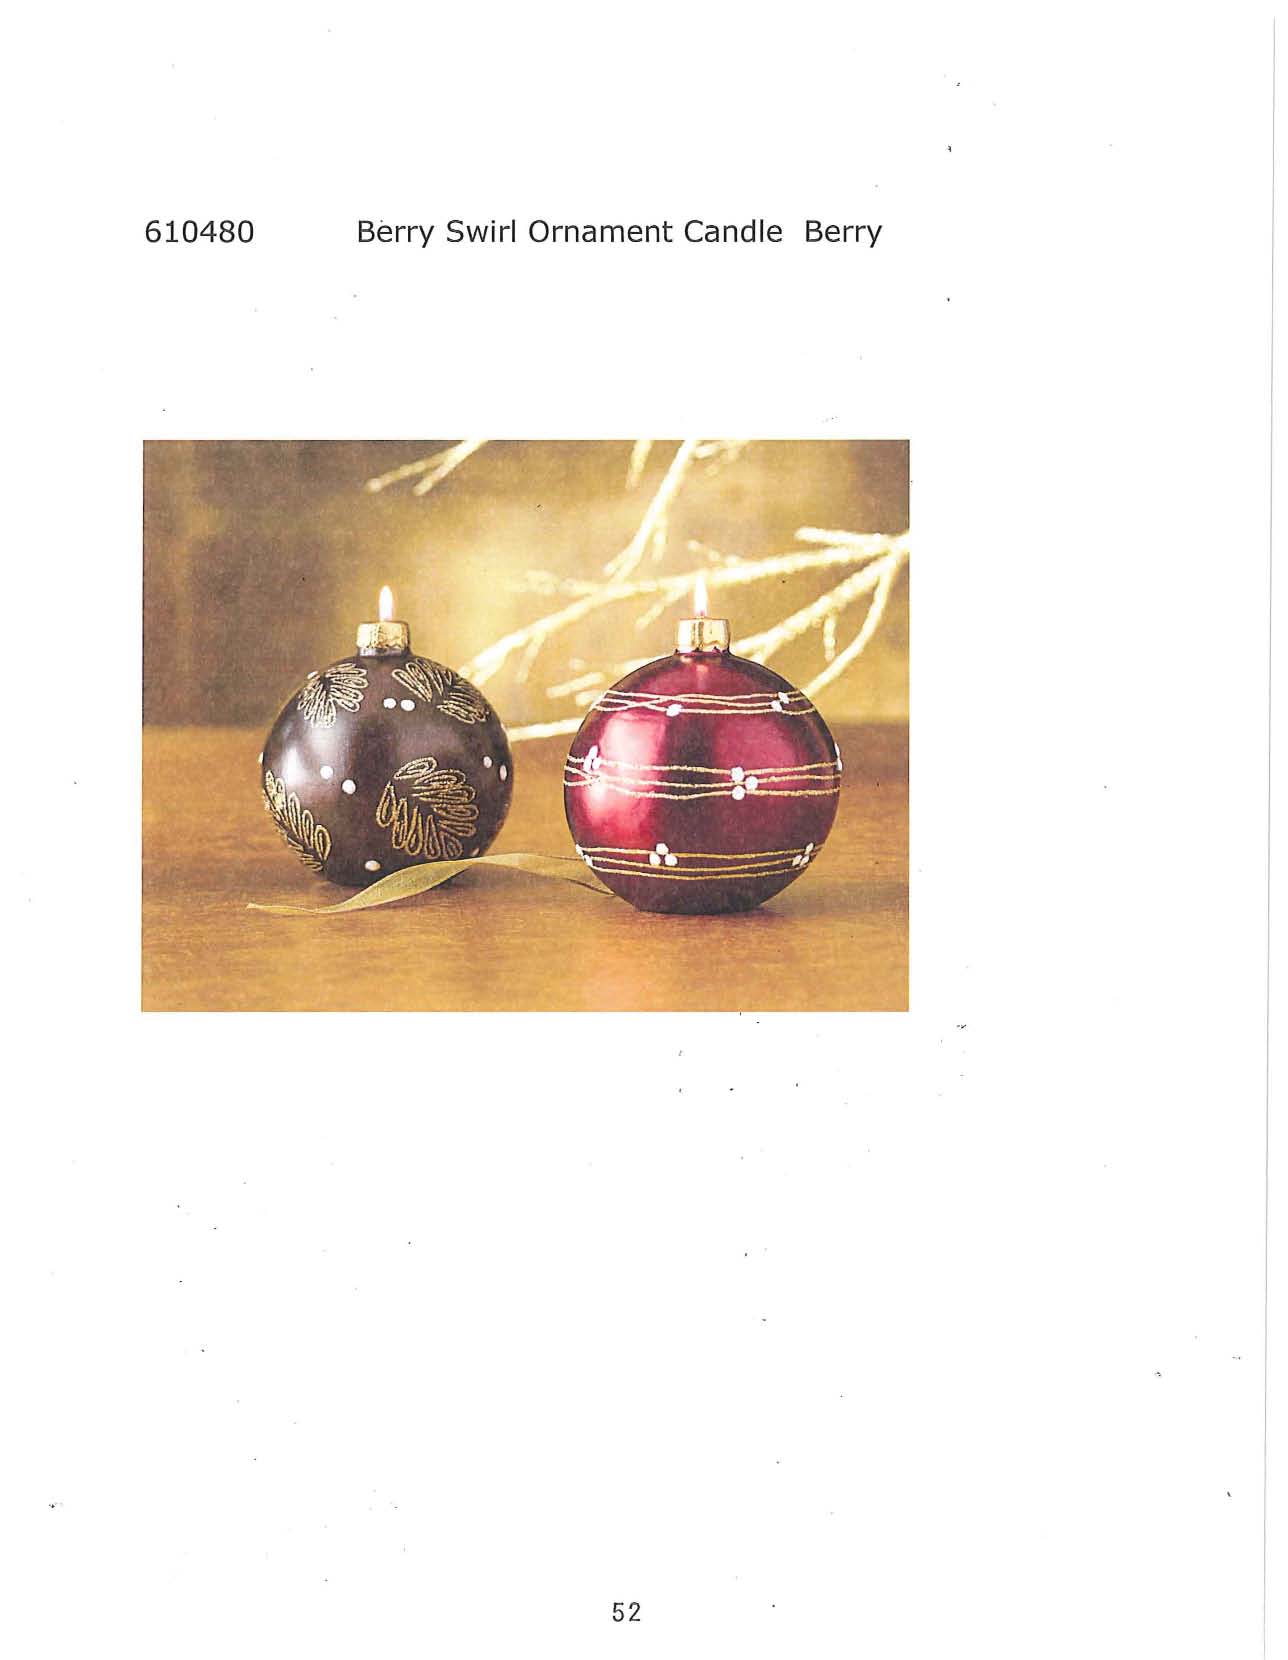 Berry Swirl Ornament Candle - Berry